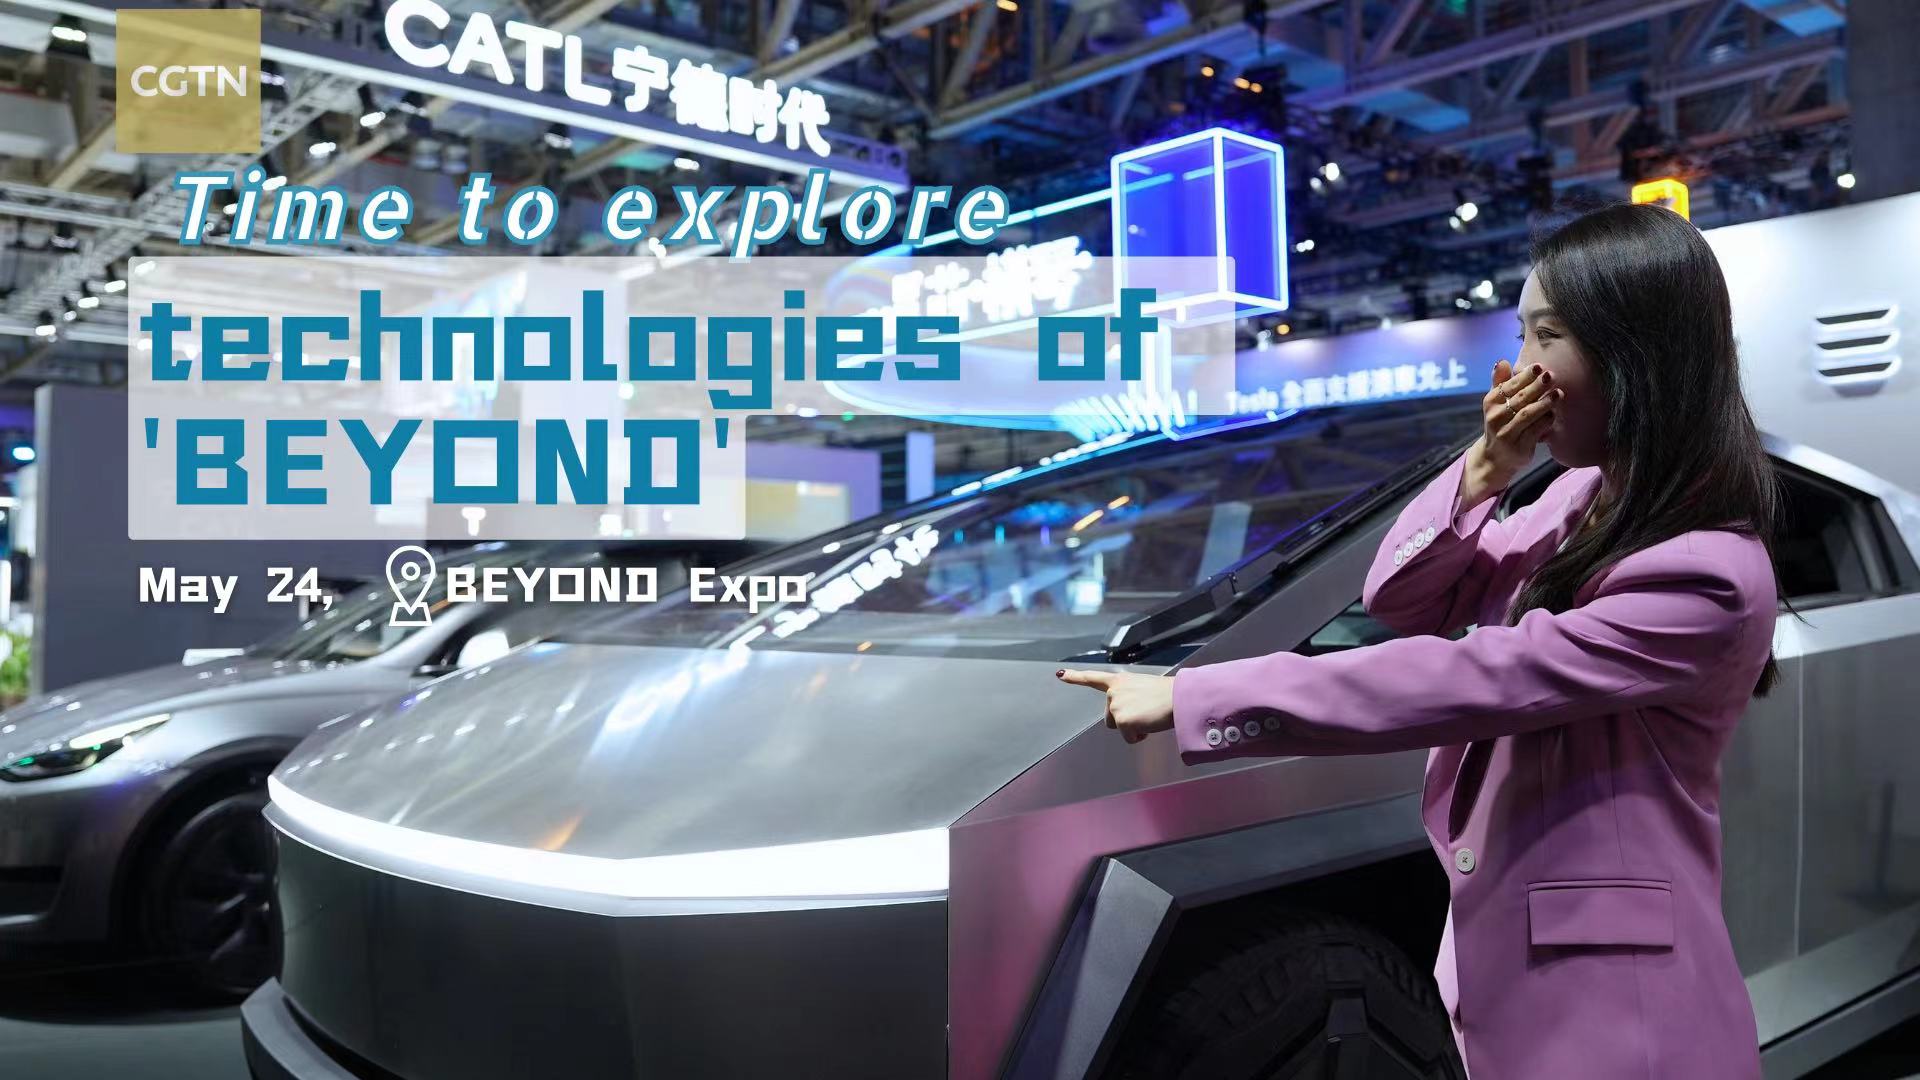 Live: CGTN takes you to explore technologies of 'BEYOND'